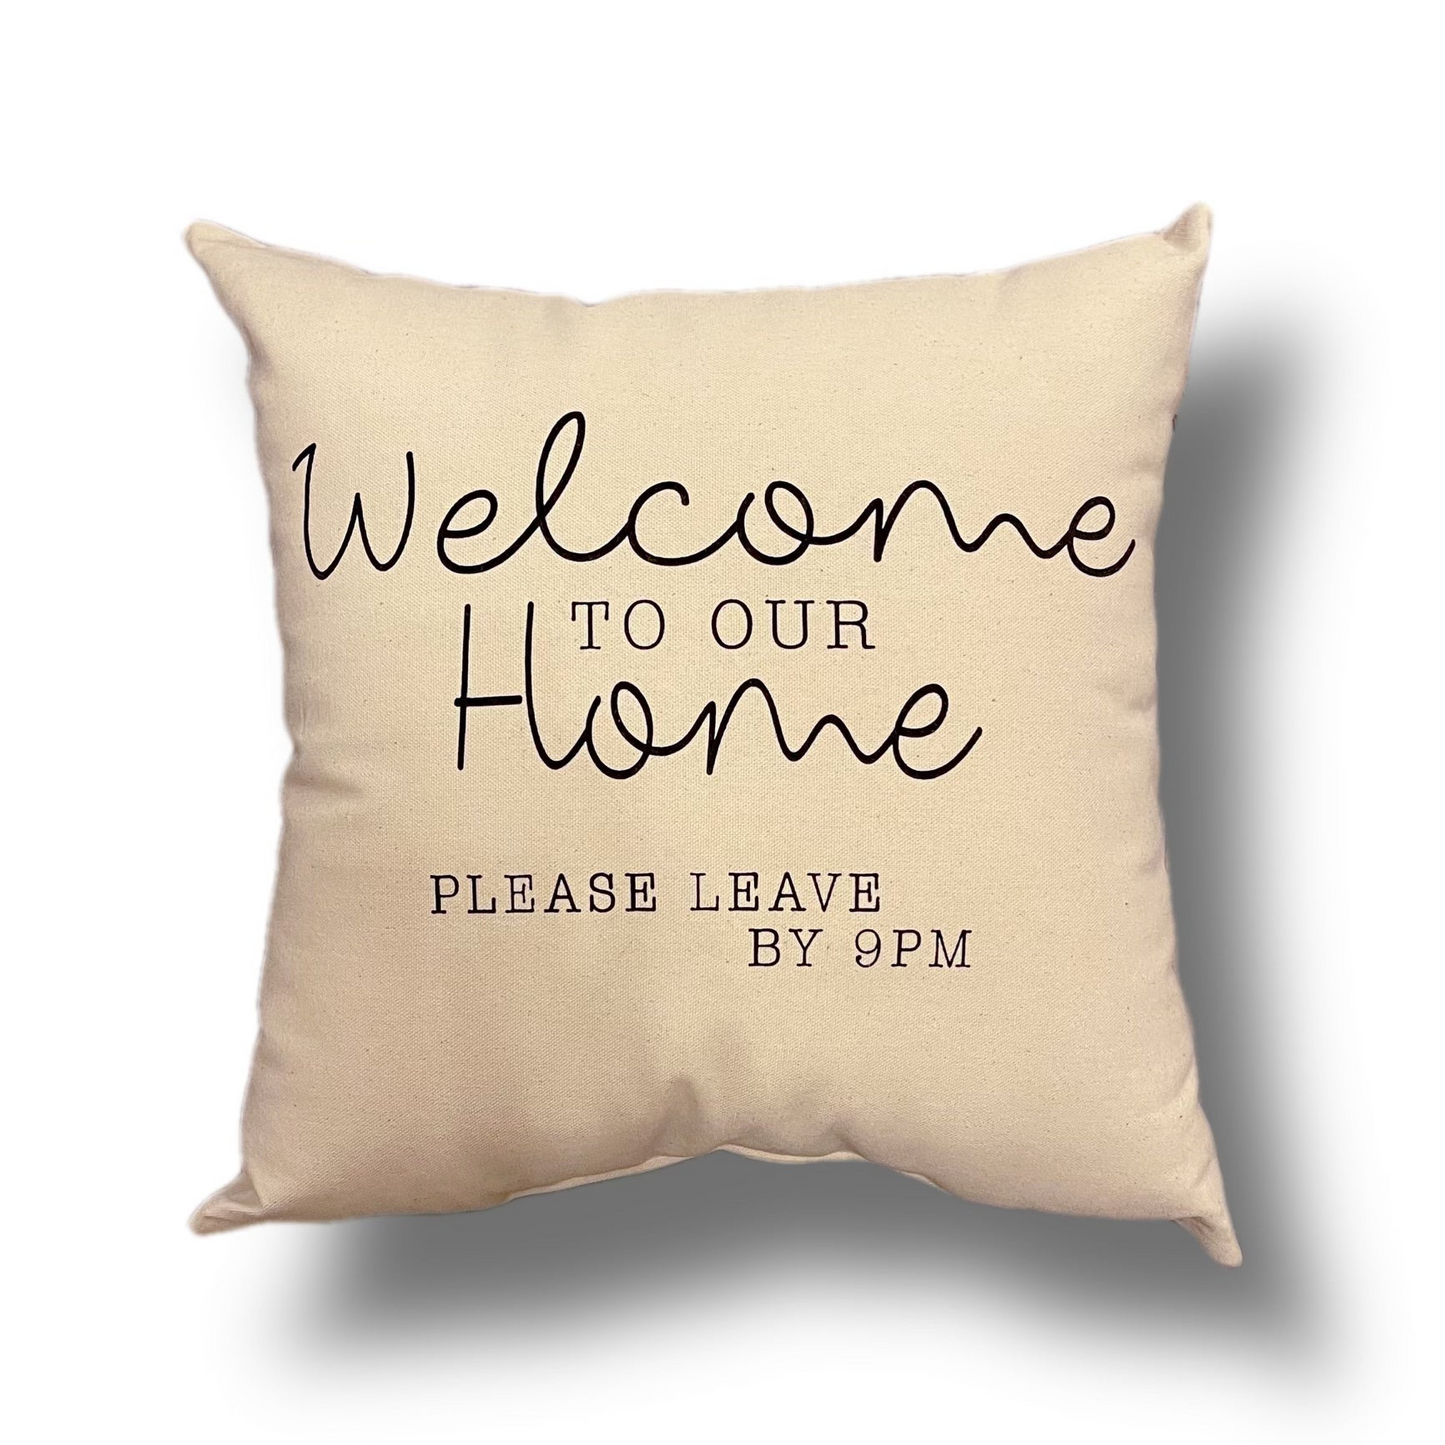 Light beige pillow that says "welcome to our home please leave by 9PM" on a white background